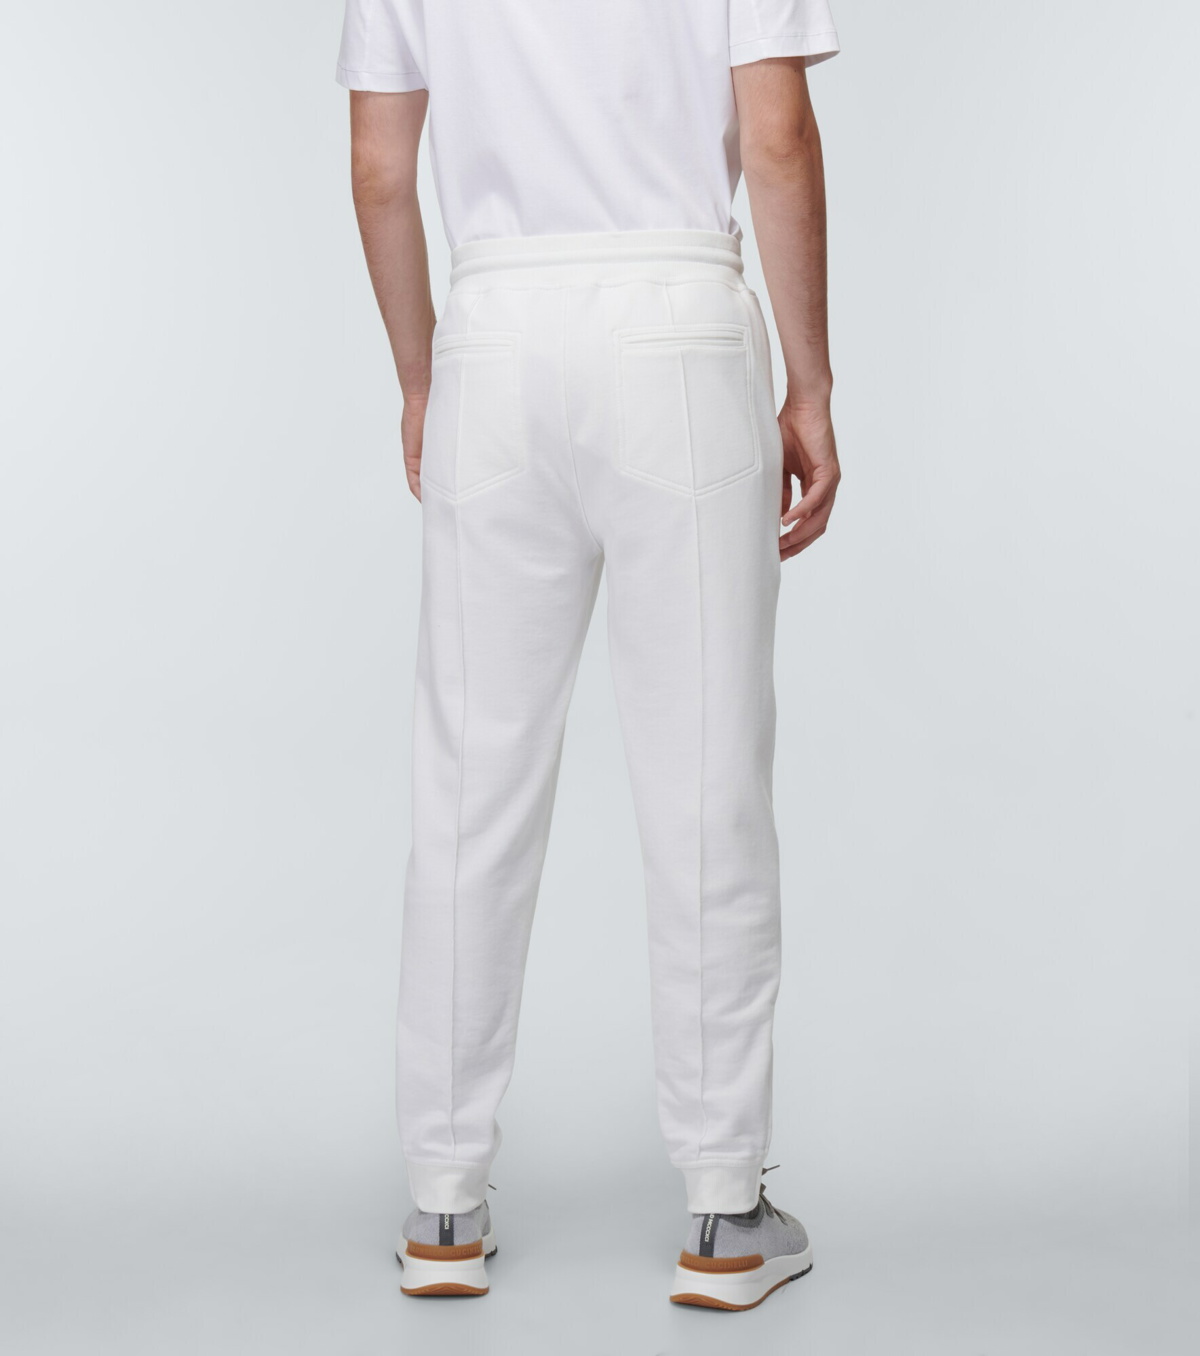 BRUNELLO CUCINELLI Tapered Ribbed Cotton Sweatpants for Men